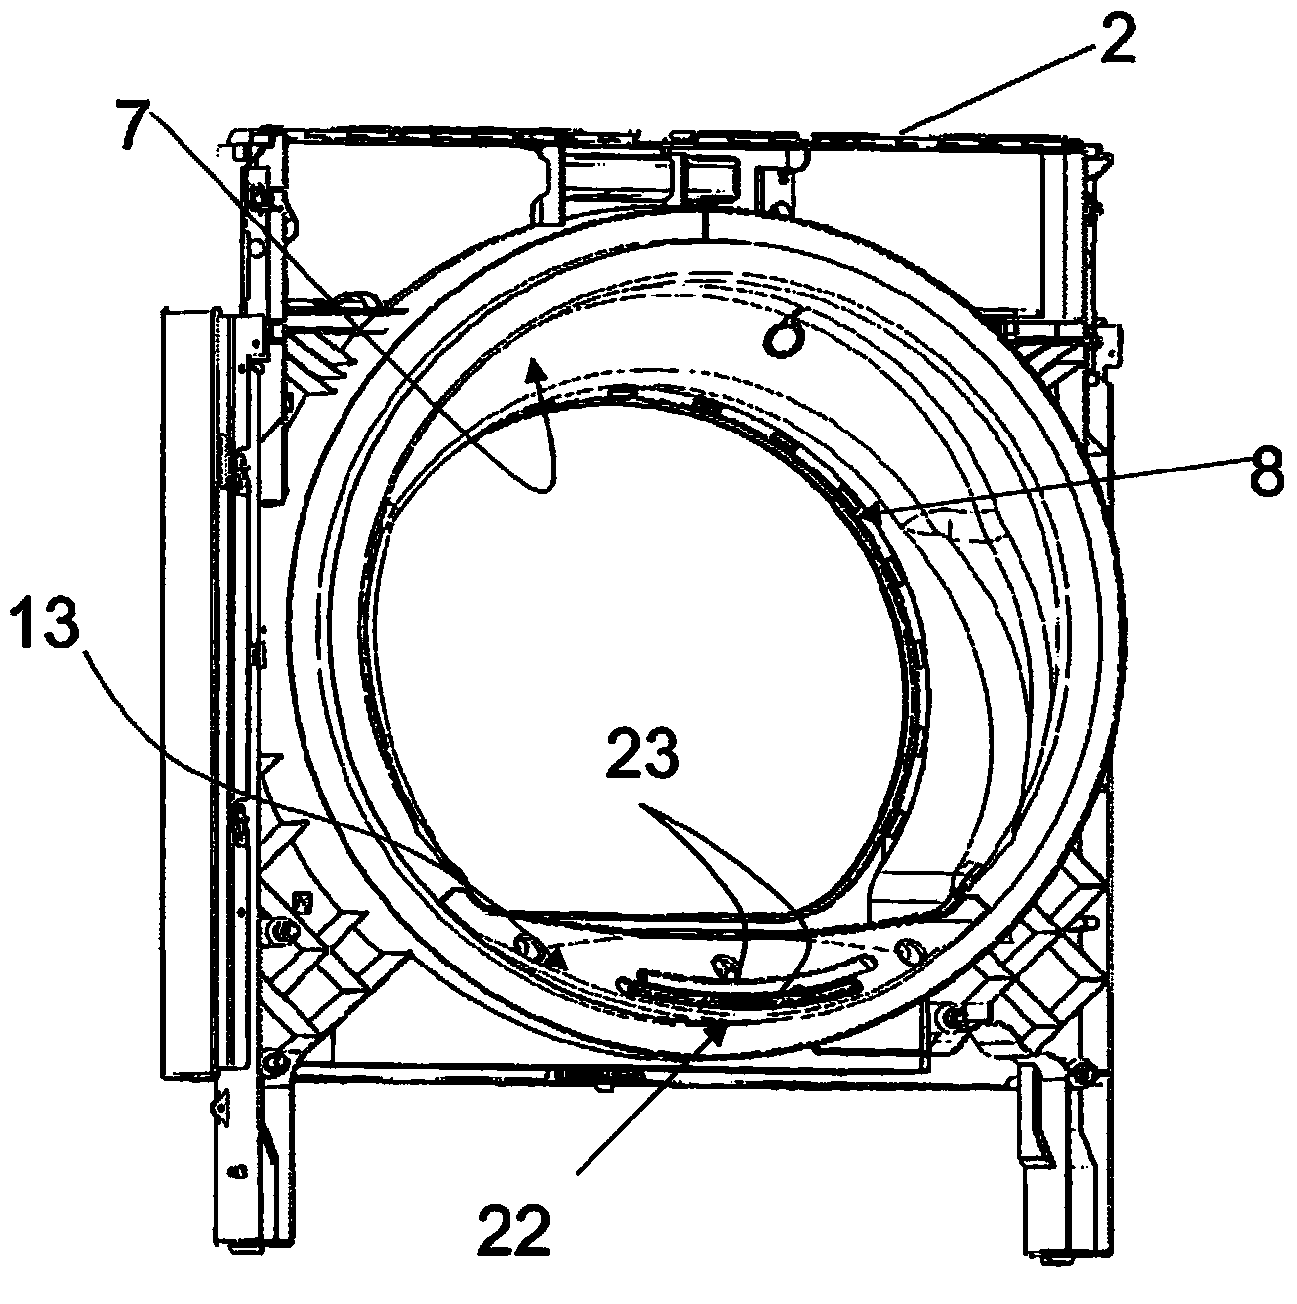 A method of controlling a rotatable-drum laundry dryer and a rotatable-drum laundry dryer implementing the method